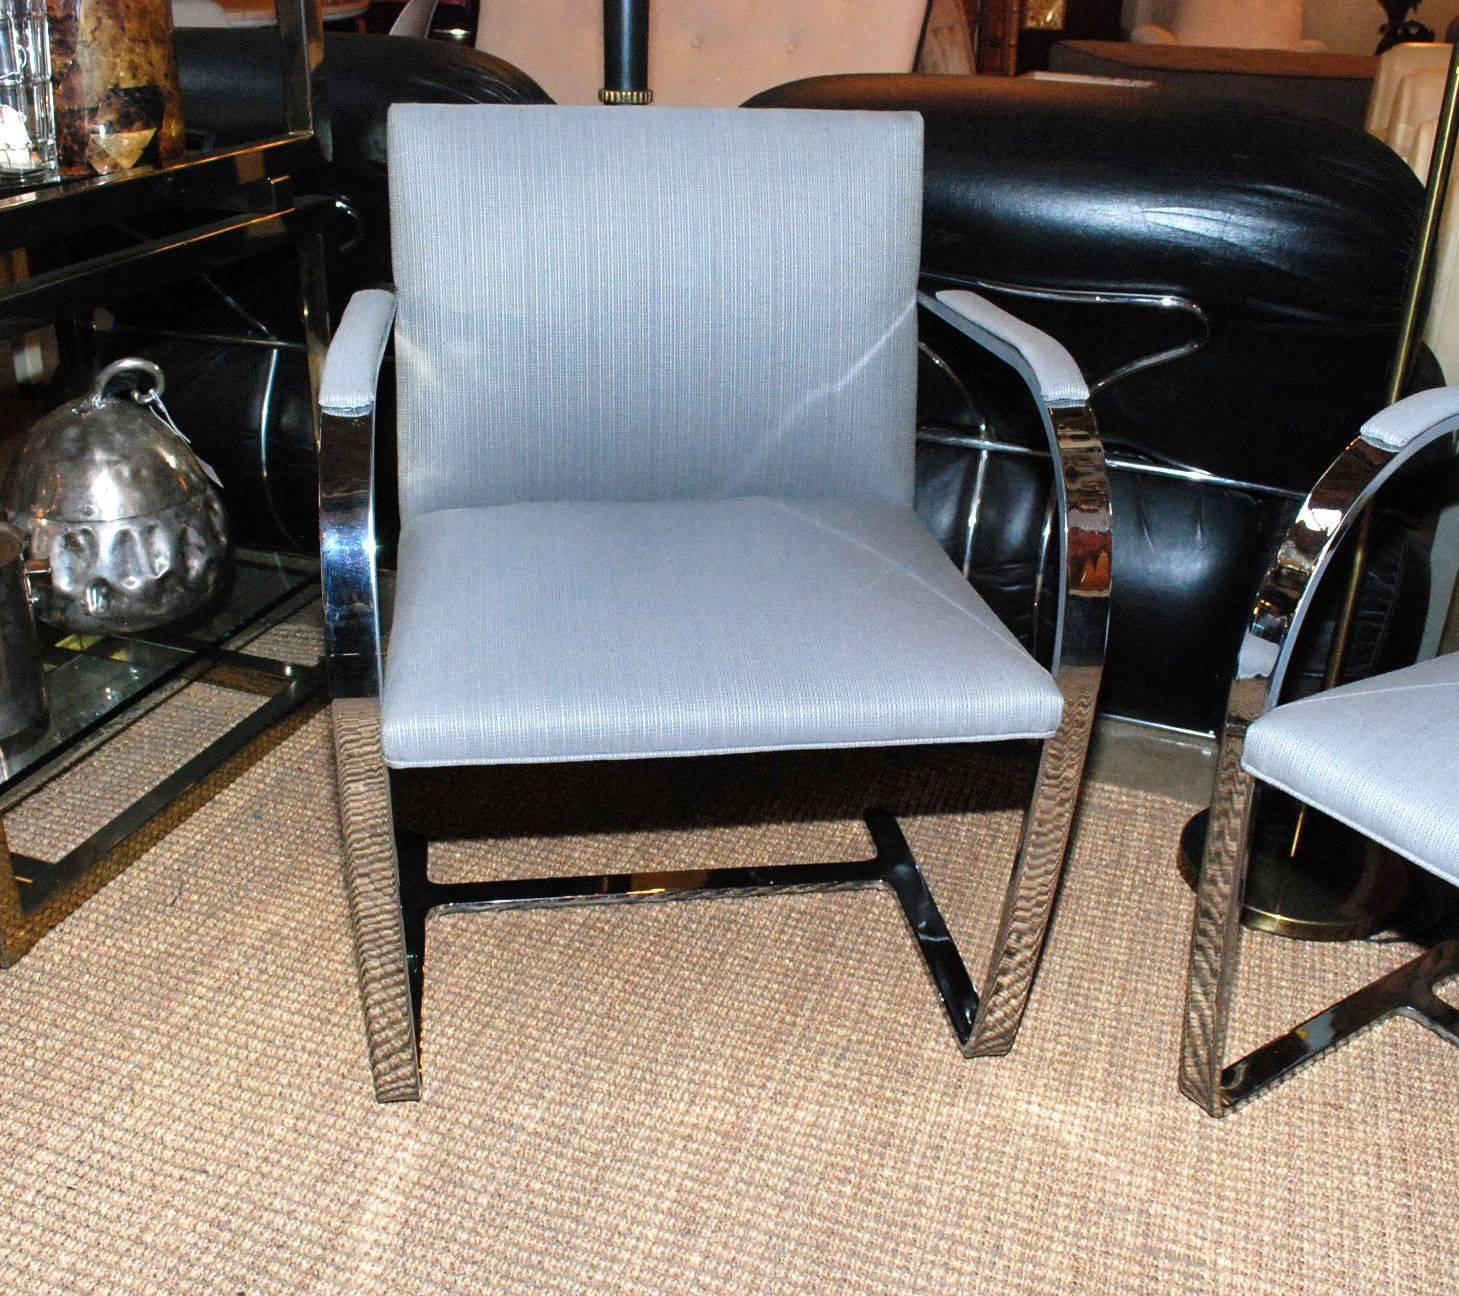 A wonderful pair of vintage Brno chairs by Mies van der Rohe. Made of chrome-plated metal and newly upholstered with light blue fabric.